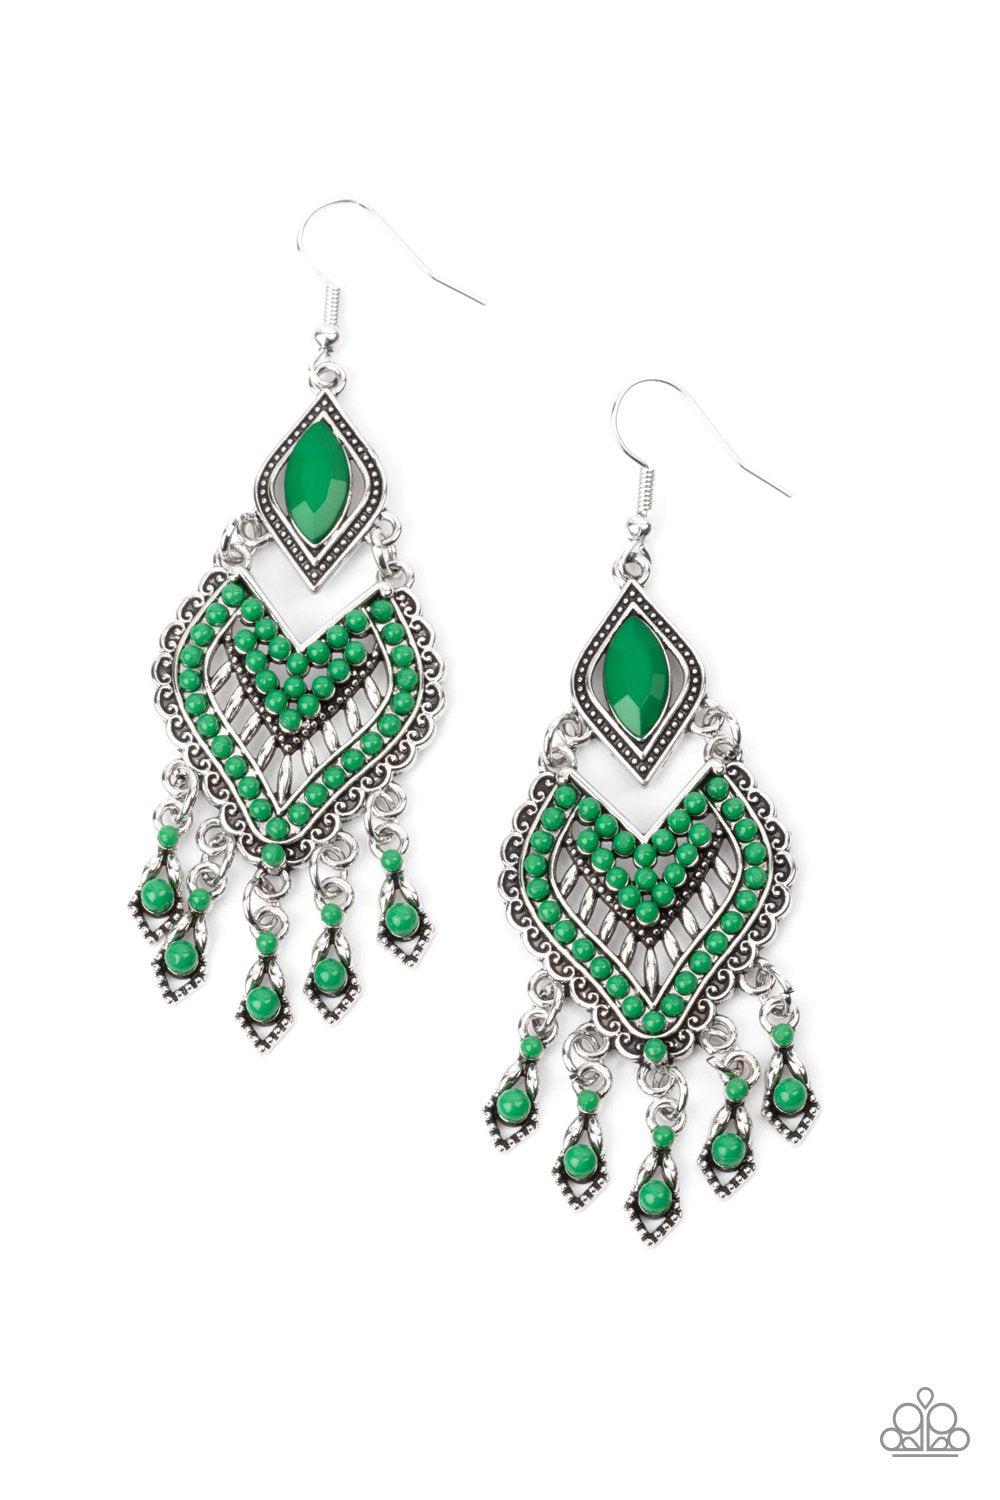 Dearly Debonair Green and Silver Earrings - Paparazzi Accessories 2021 Convention Exclusive- lightbox - CarasShop.com - $5 Jewelry by Cara Jewels